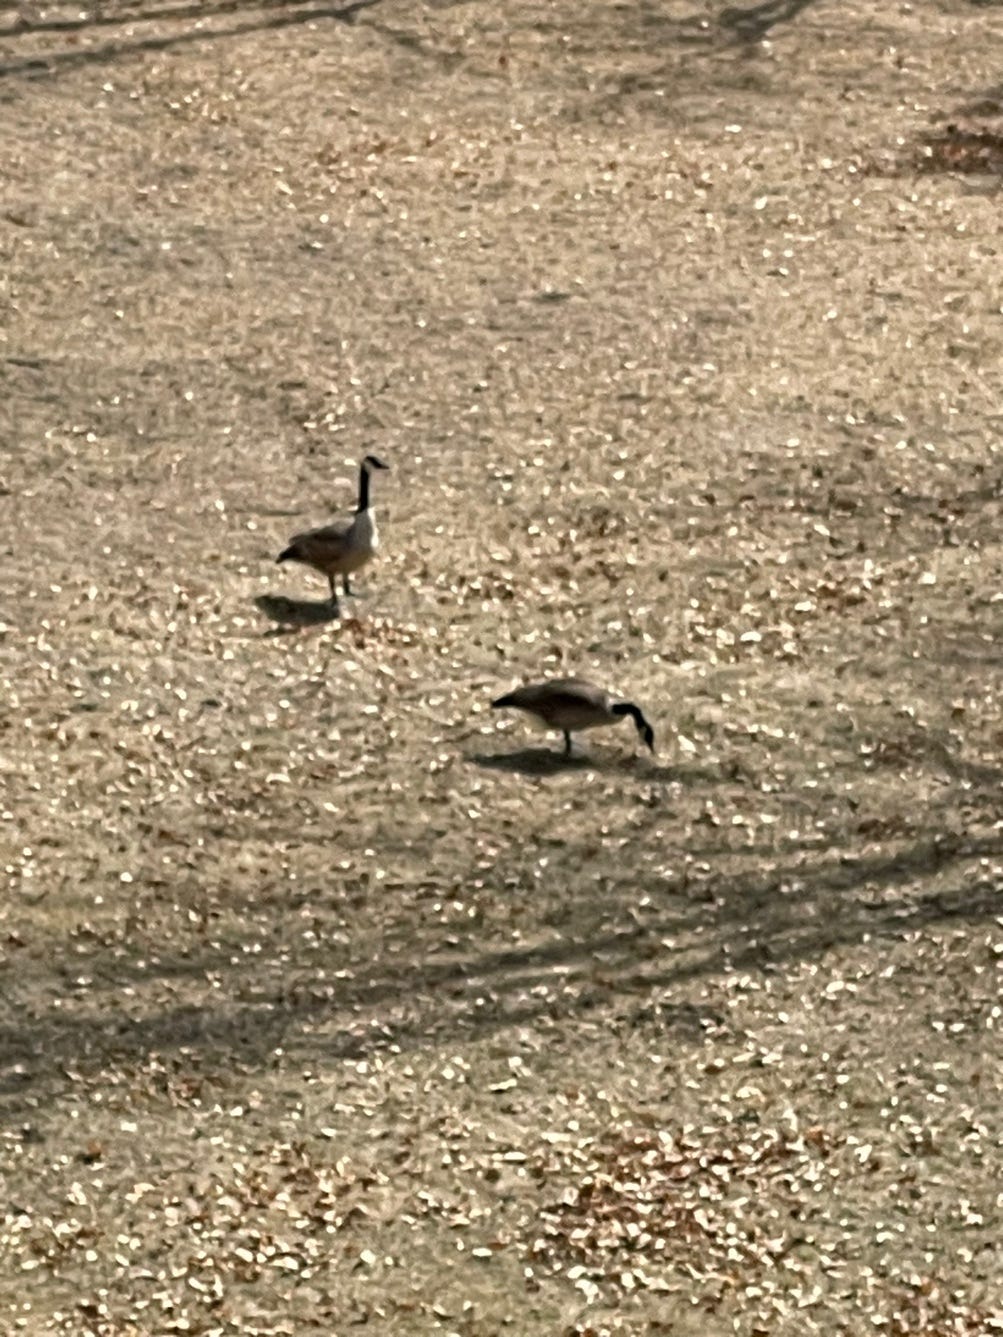 A pair of geese walking on the ground

Description automatically generated